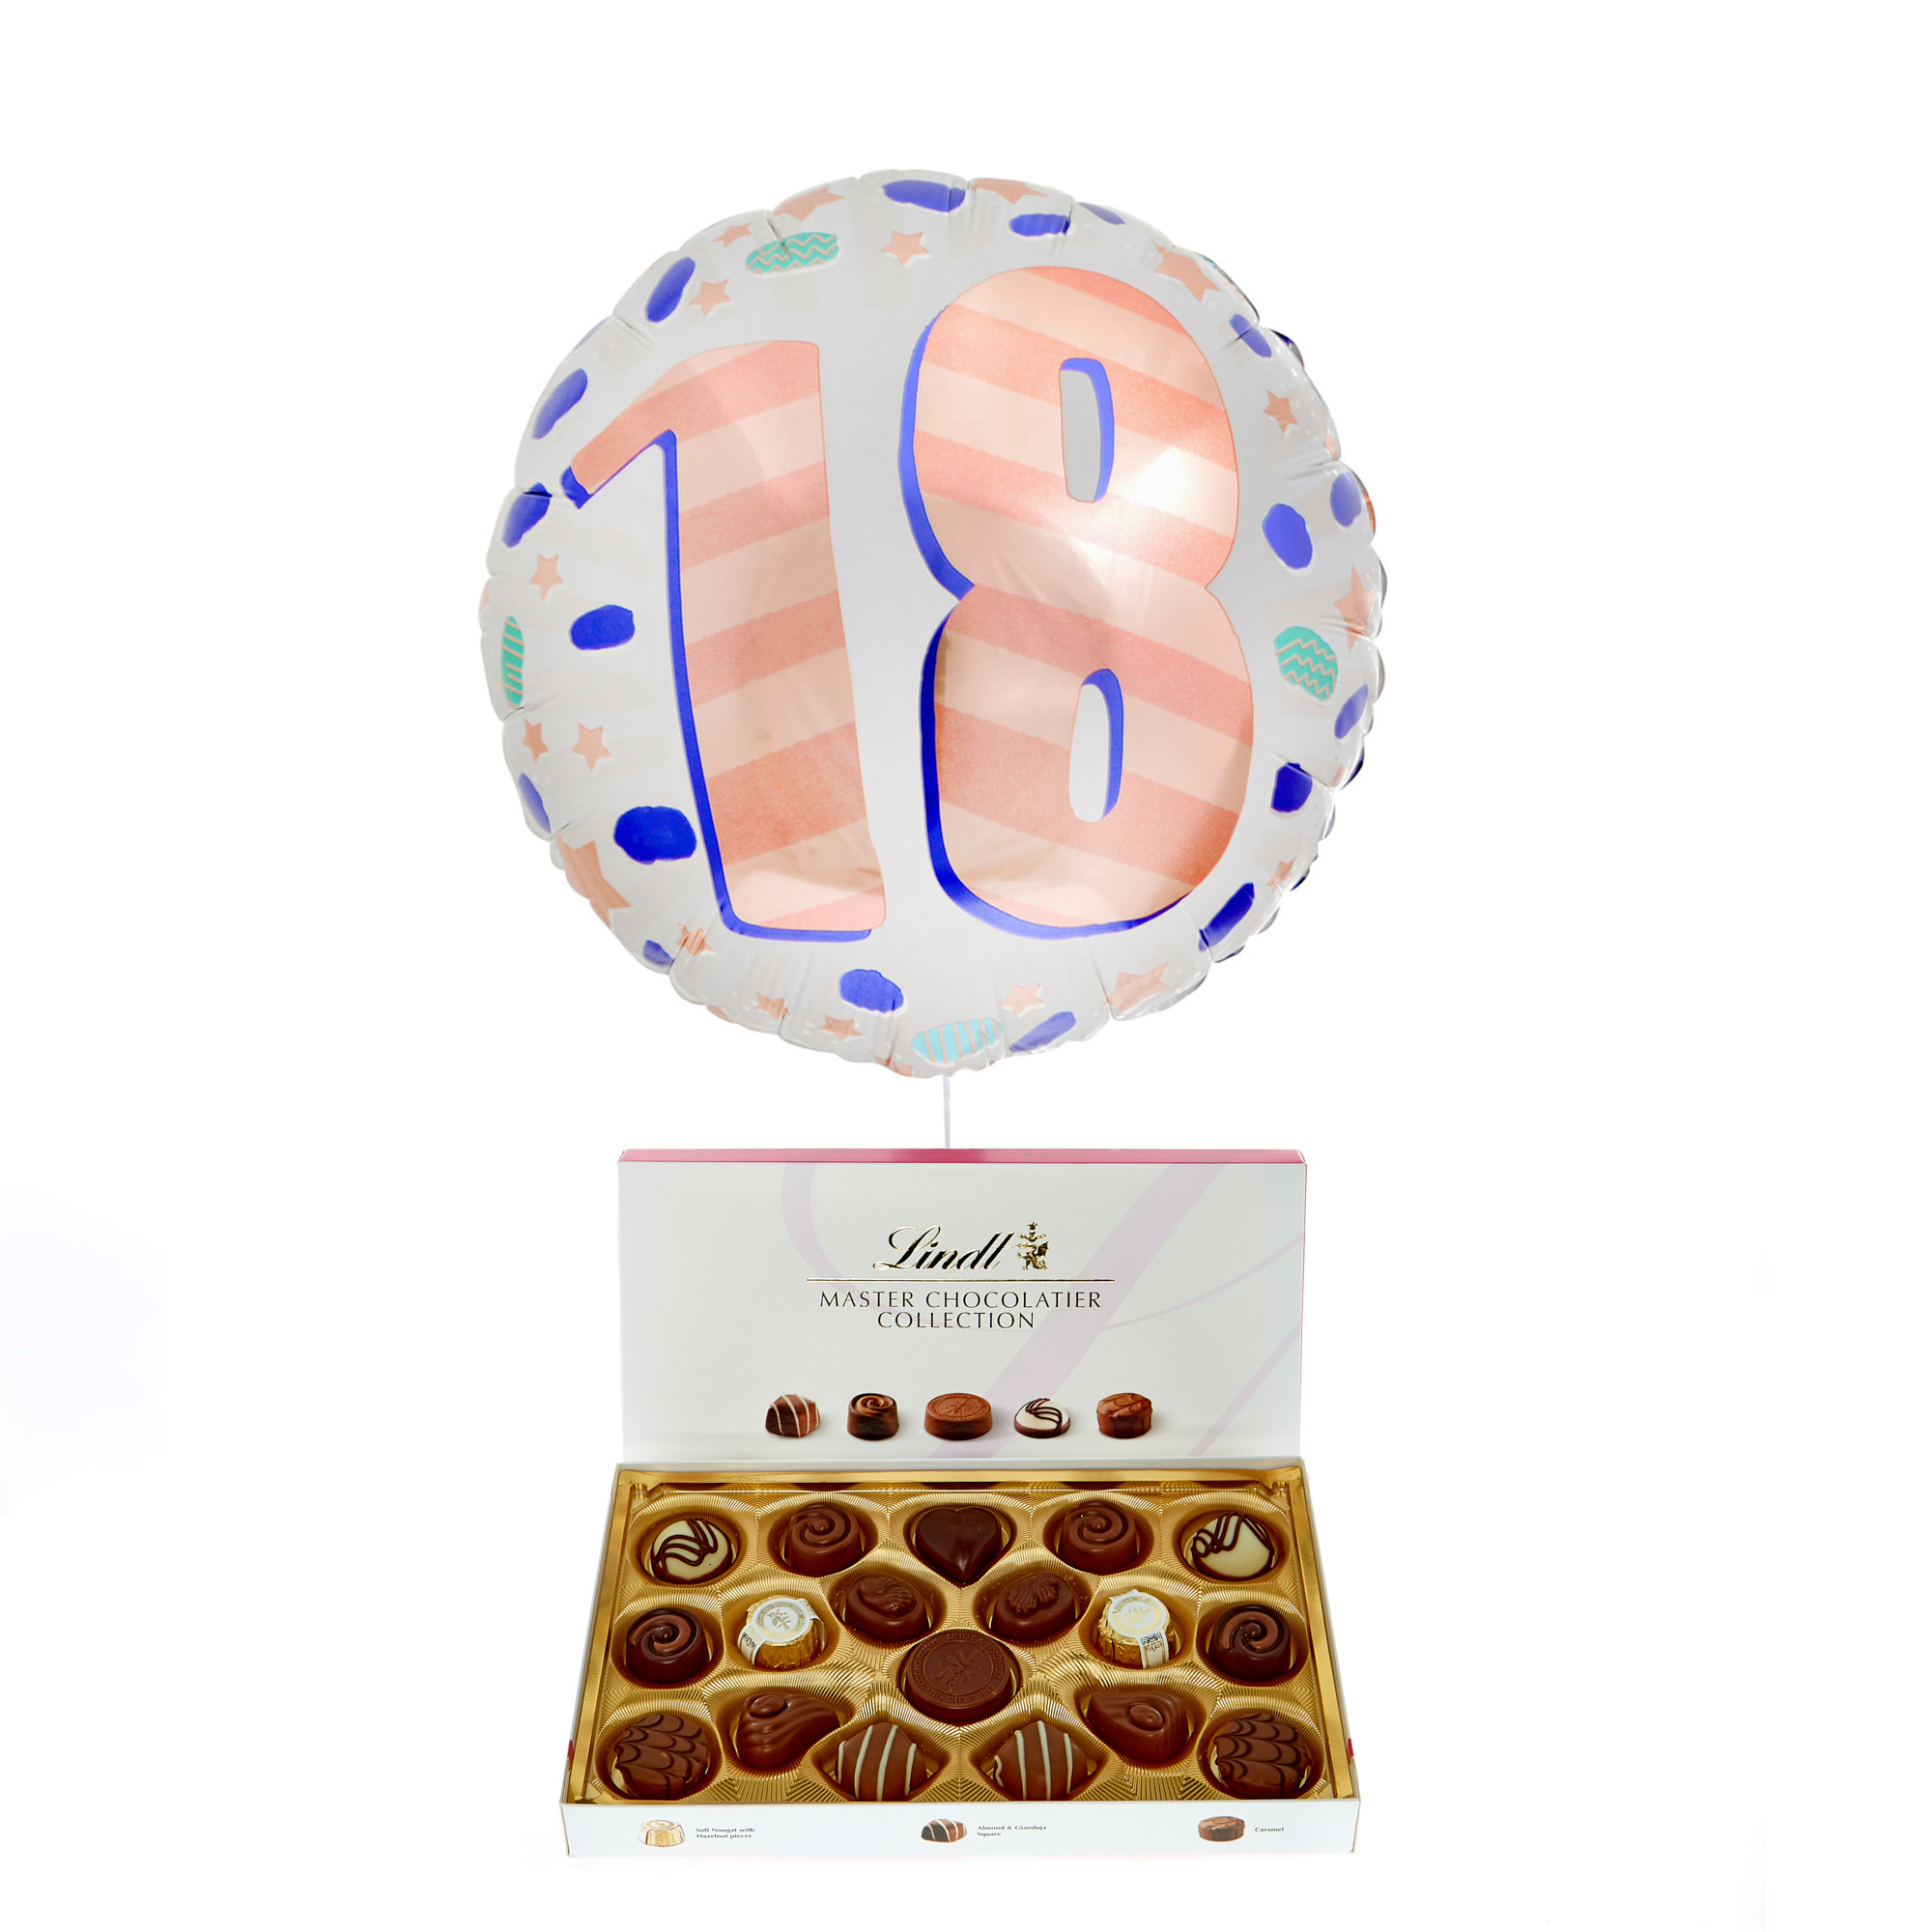 Spots & Stripes 18th Birthday Balloon & Lindt Chocolates - FREE GIFT CARD!